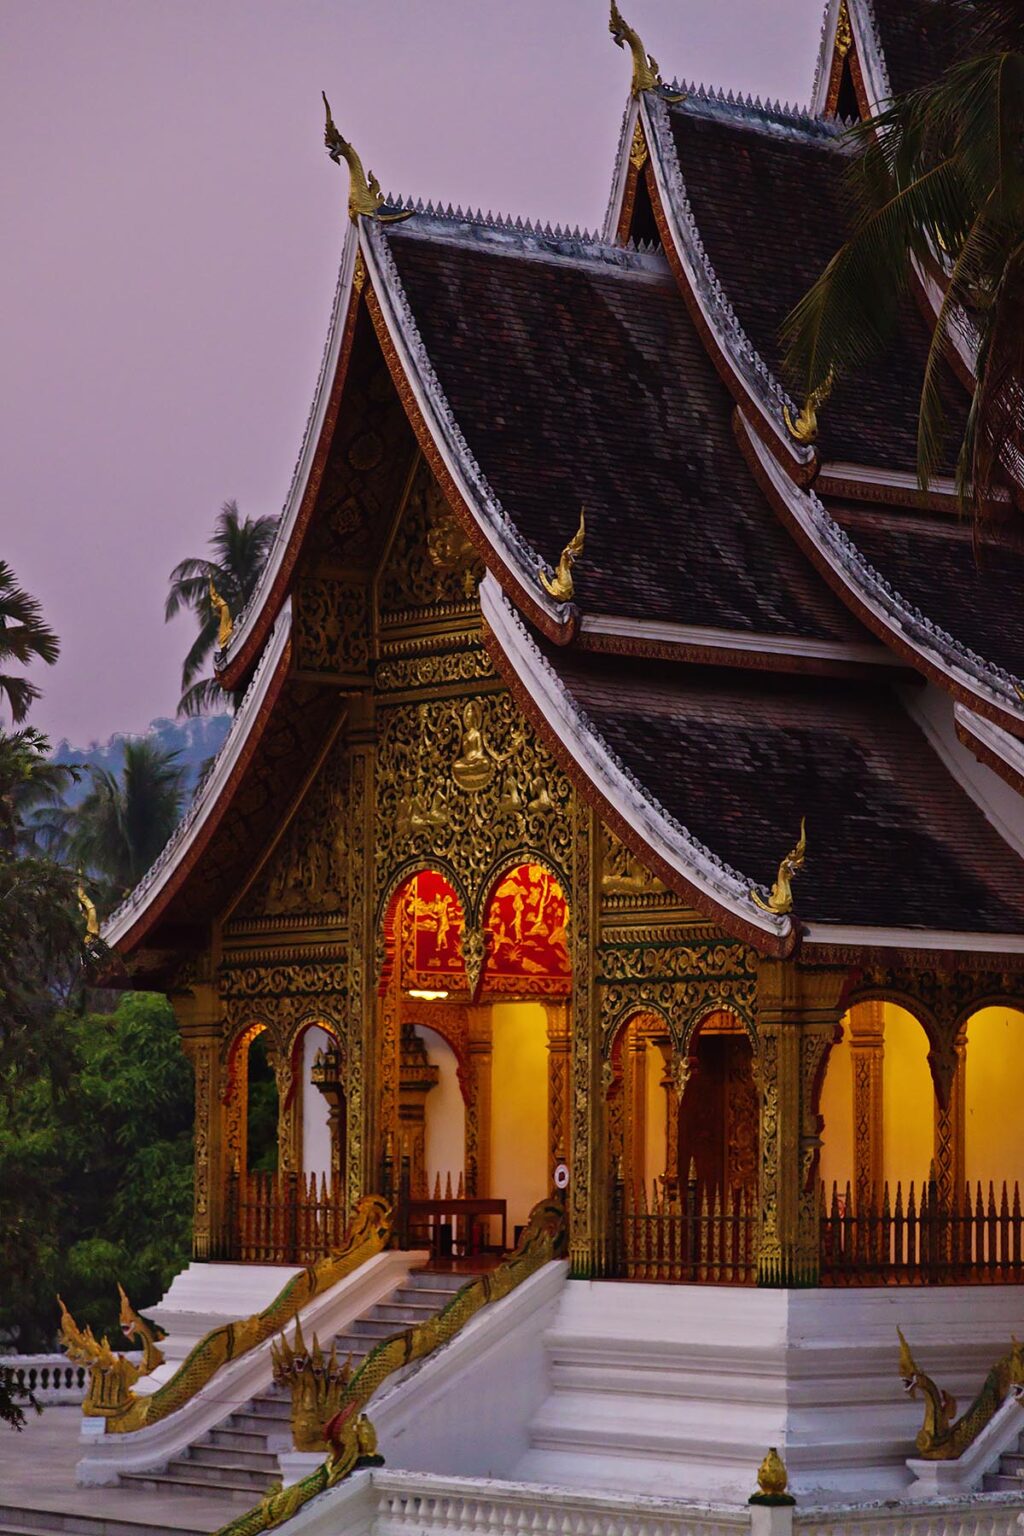 The HAW PHA BANG or Royal Temple is located in the Royal Palace complex - LUANG PRABANG, LAOS